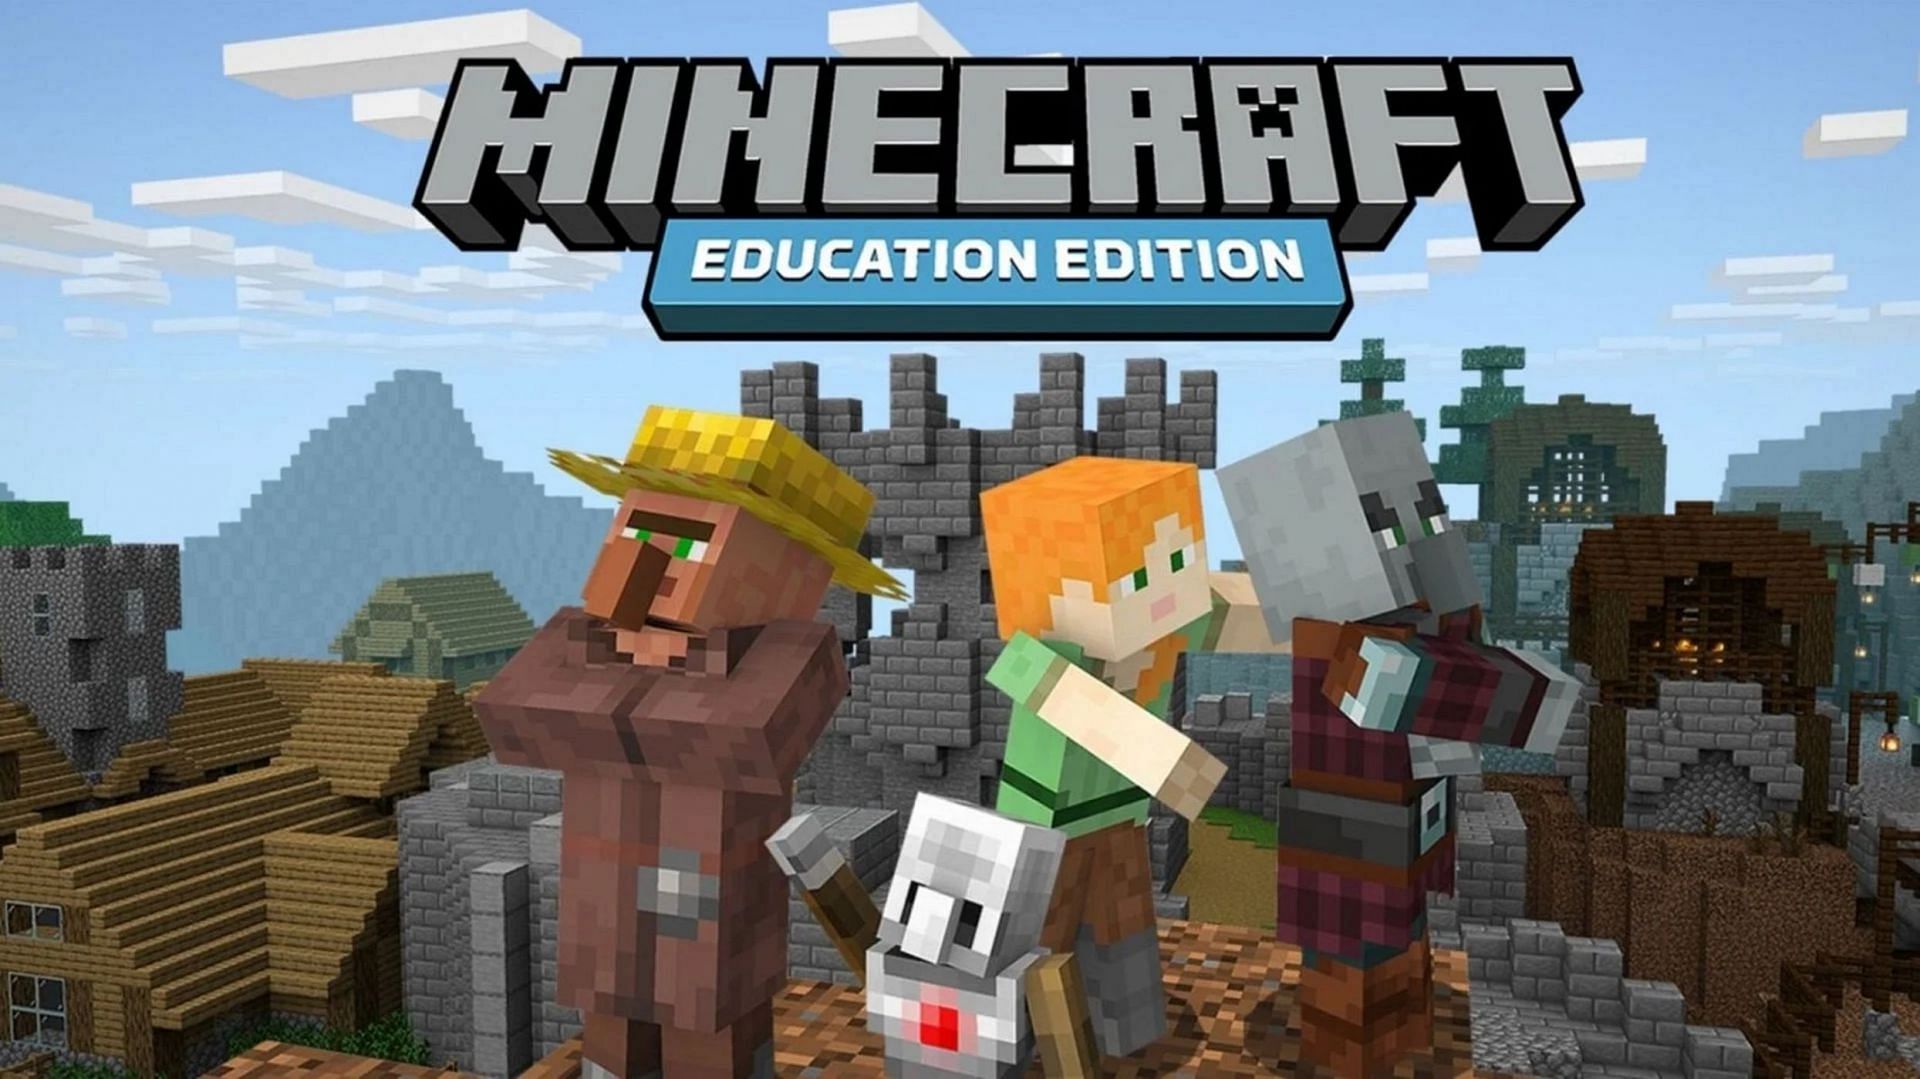 Education Edition provides a different angle to traditional Minecraft play (Image via Mojang)